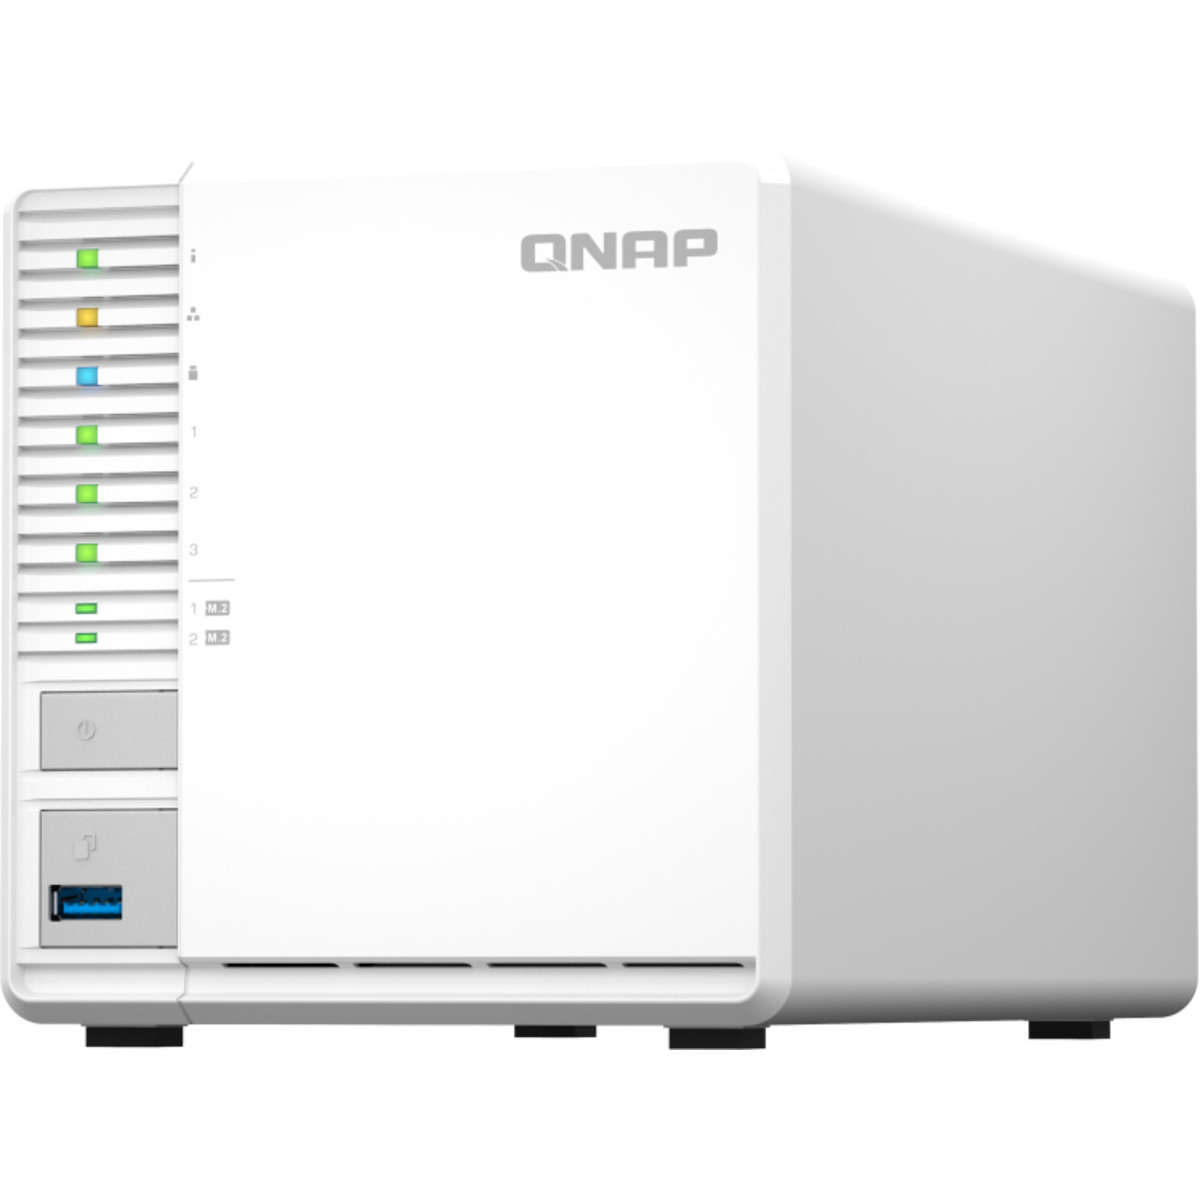 QNAP TS-364 4tb 3-Bay Desktop Multimedia / Power User / Business NAS - Network Attached Storage Device 2x2tb Western Digital Red Plus WD20EFZX 3.5 5400rpm SATA 6Gb/s HDD NAS Class Drives Installed - Burn-In Tested TS-364